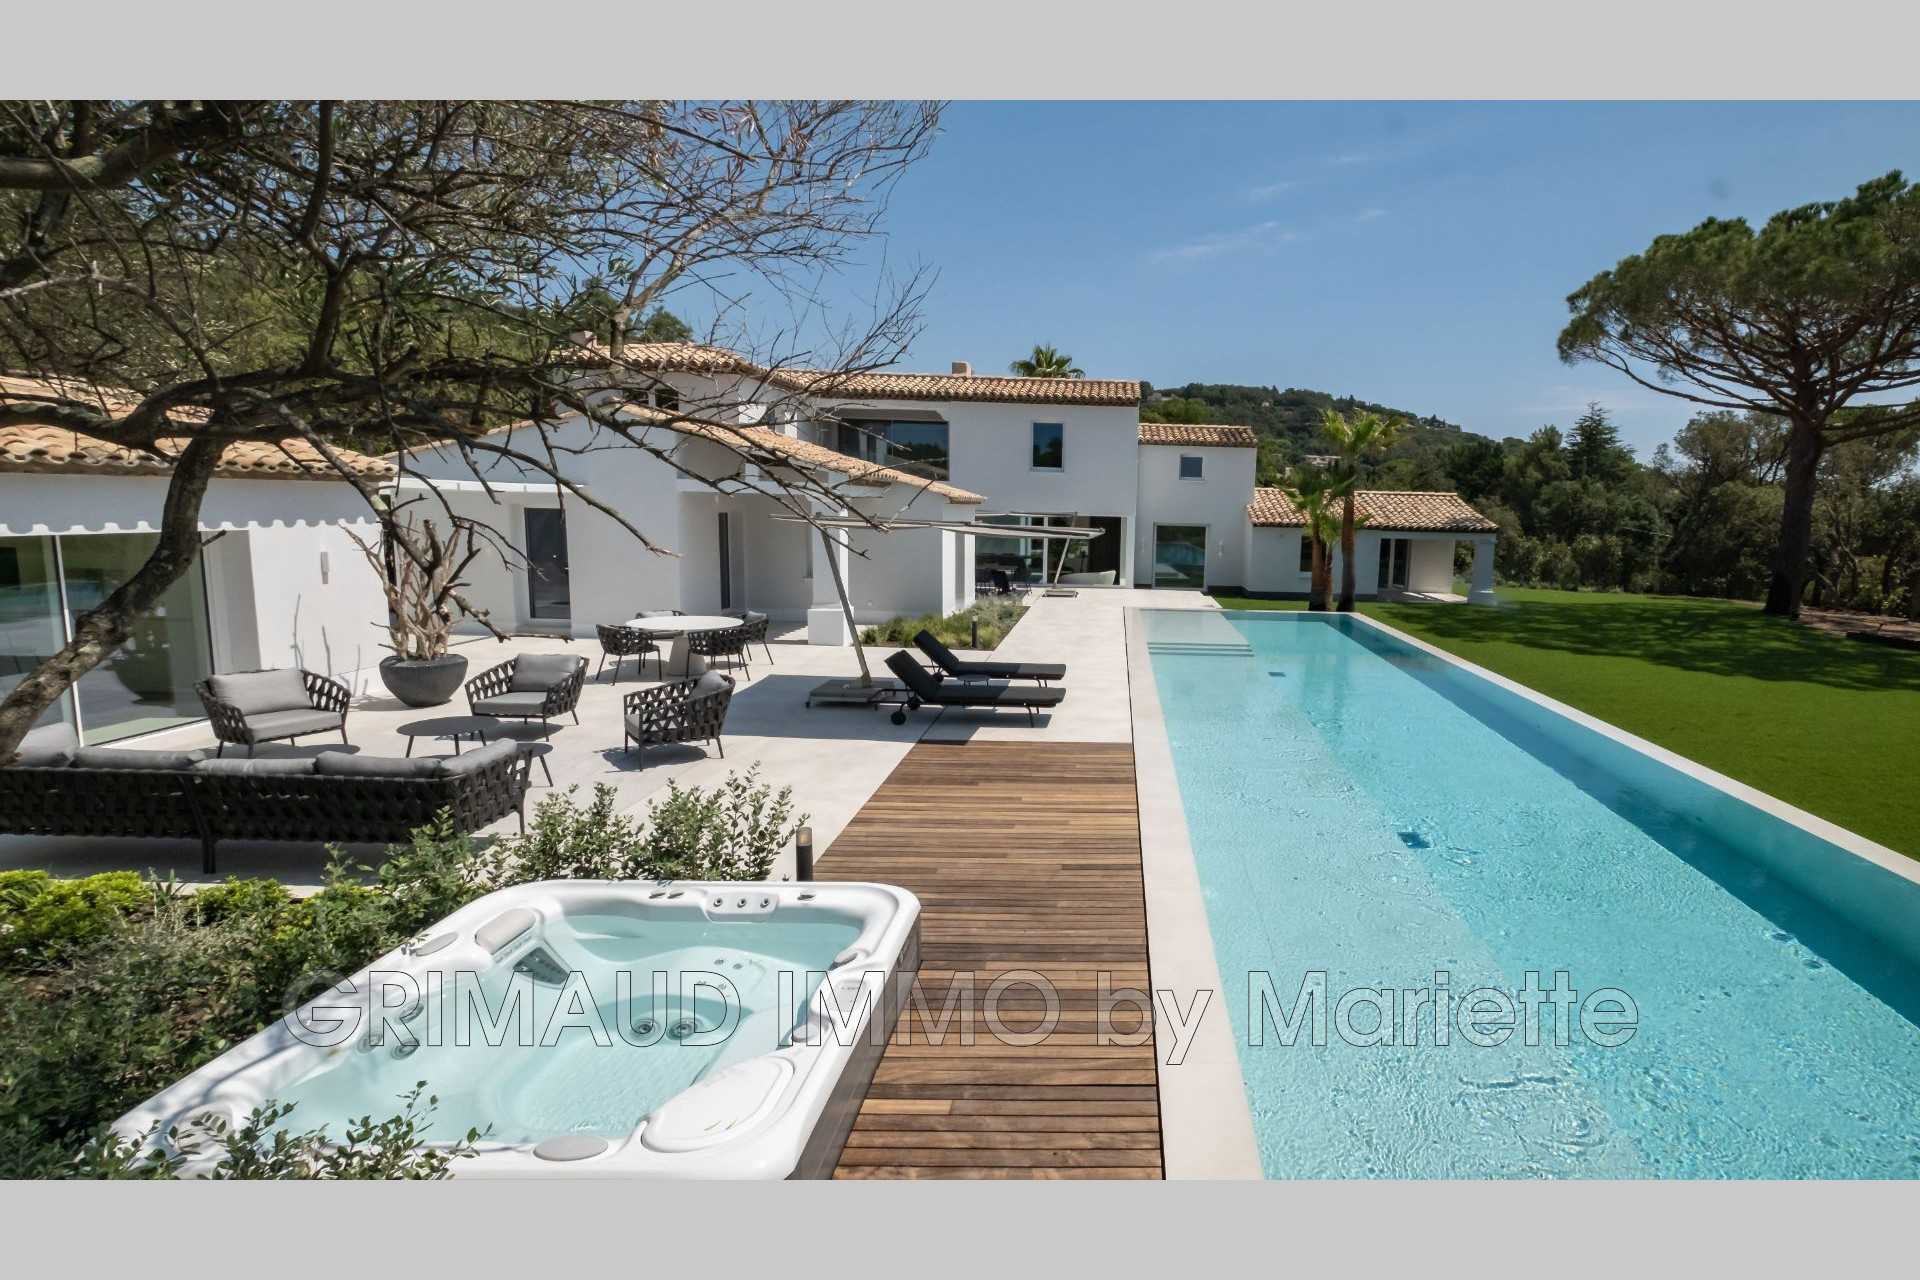 House in Grimaud, Provence-Alpes-Cote d'Azur 11688007